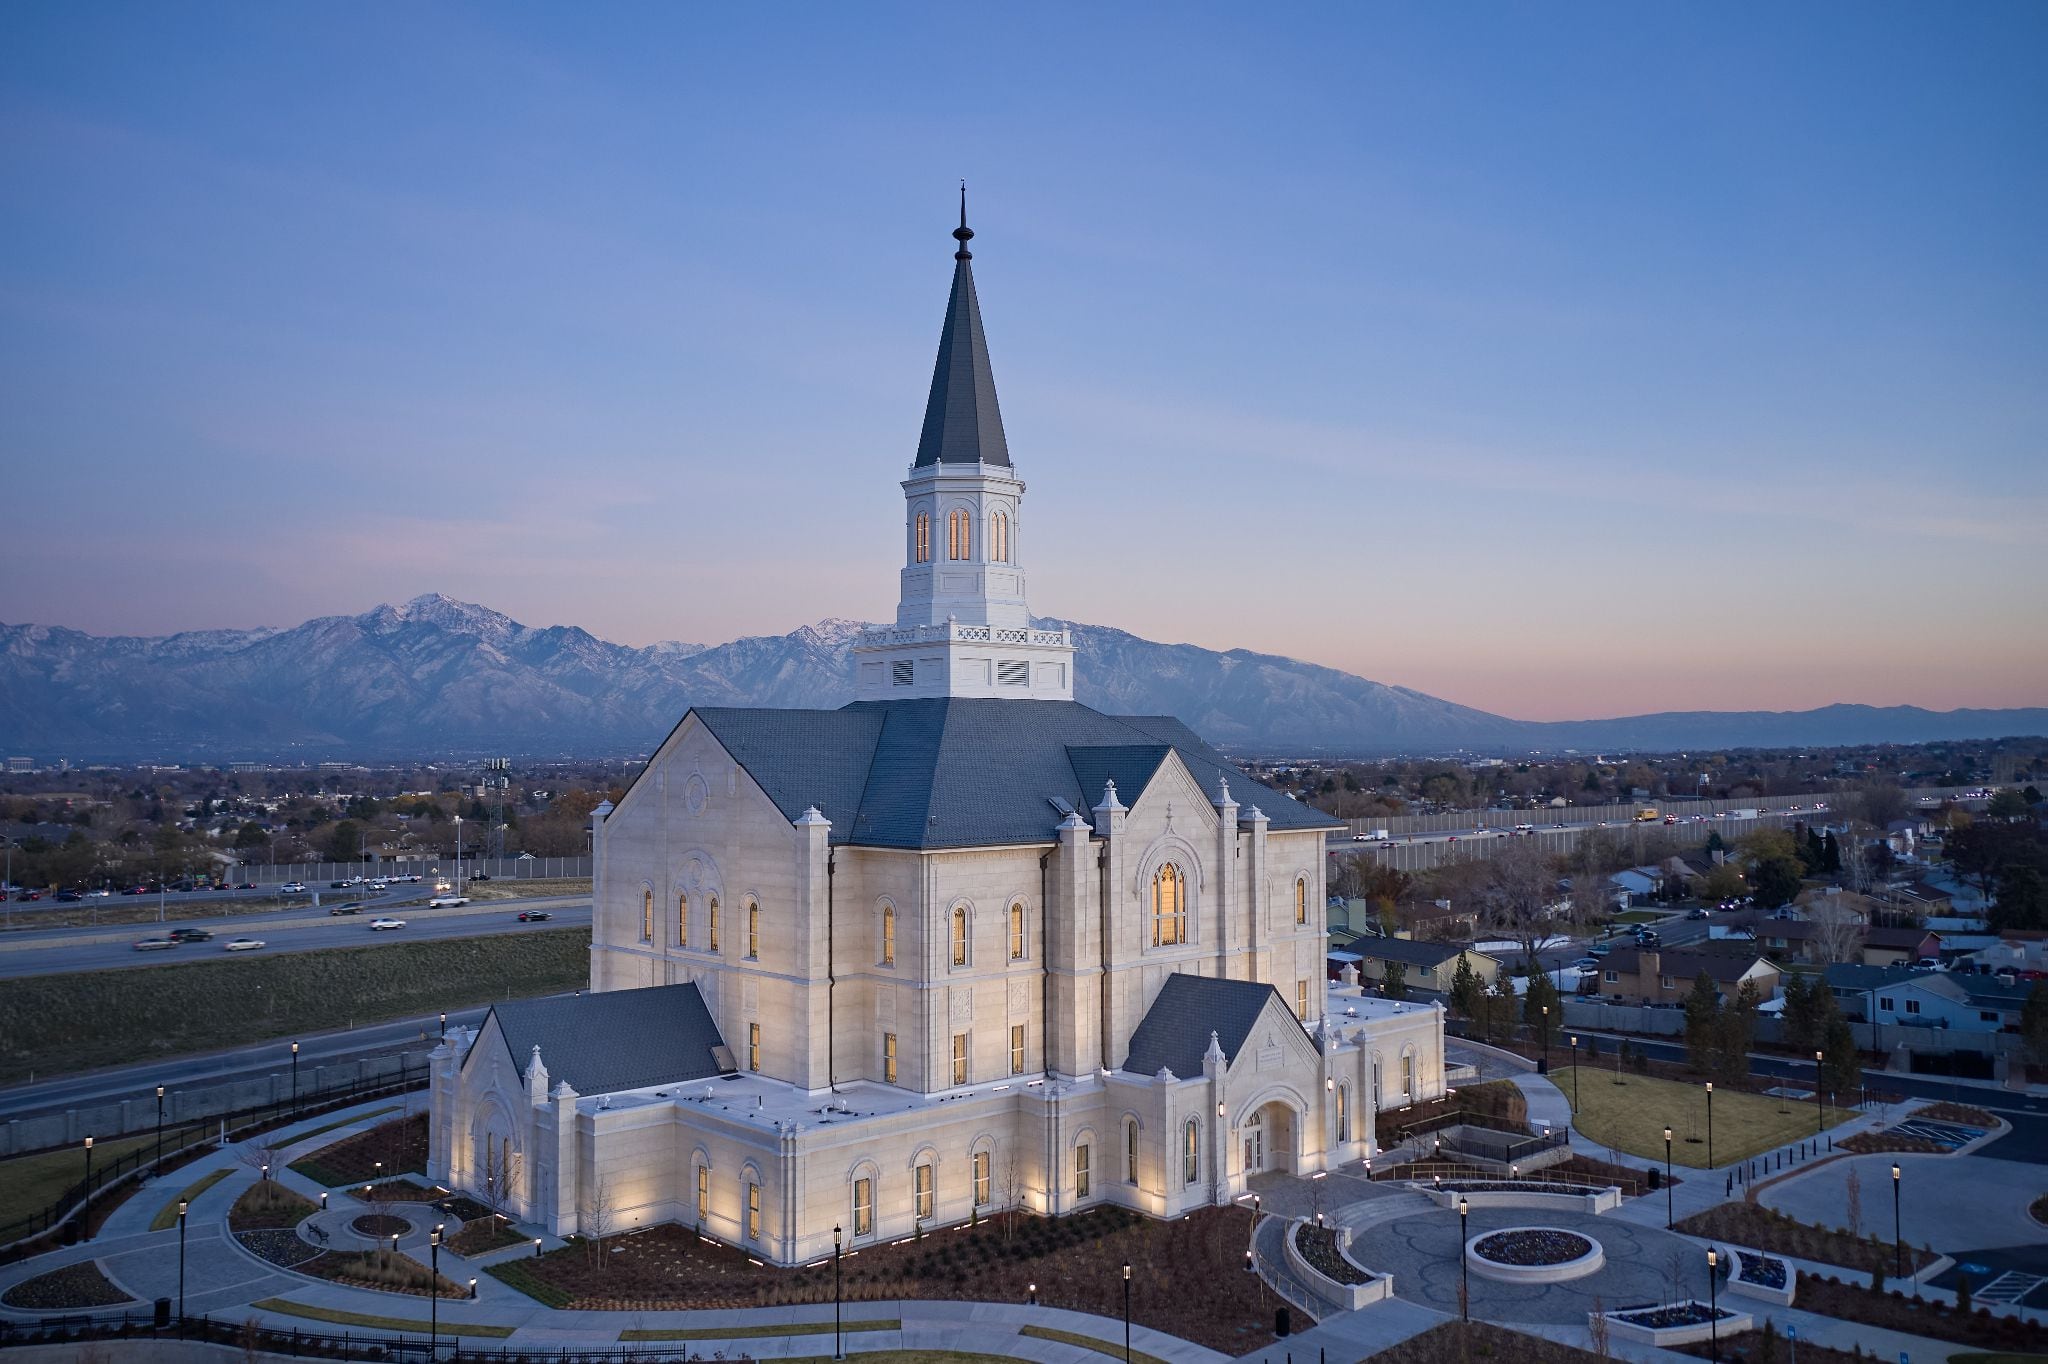 (The Church of Jesus Christ of Latter-day Saints) The Taylorsville Temple.